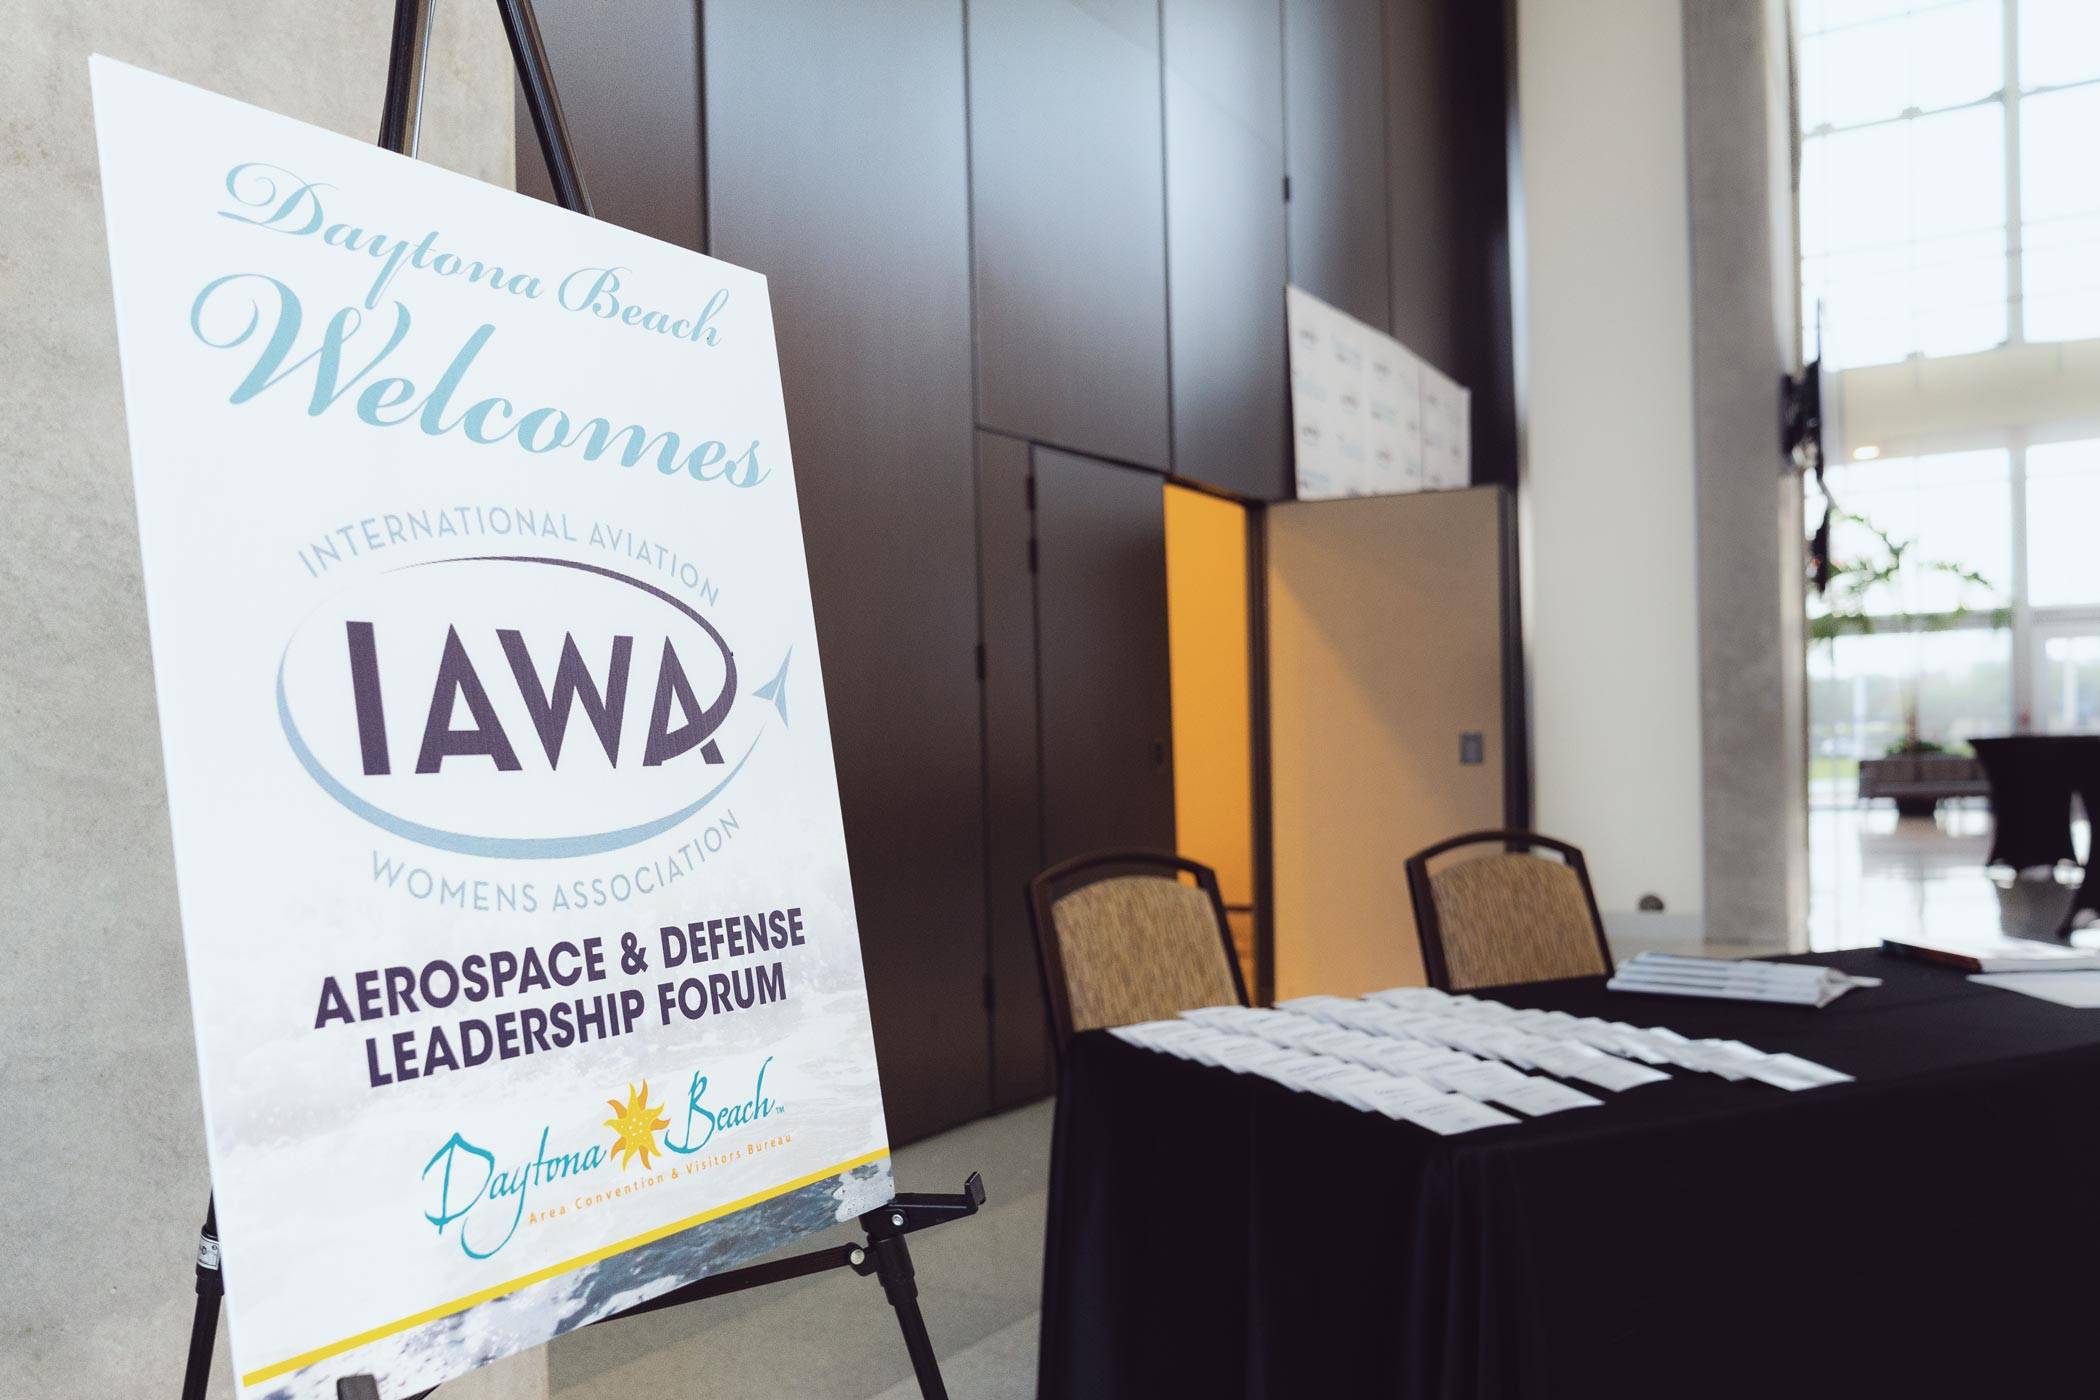 The sign in area for the IAWA conference with table and chairs.